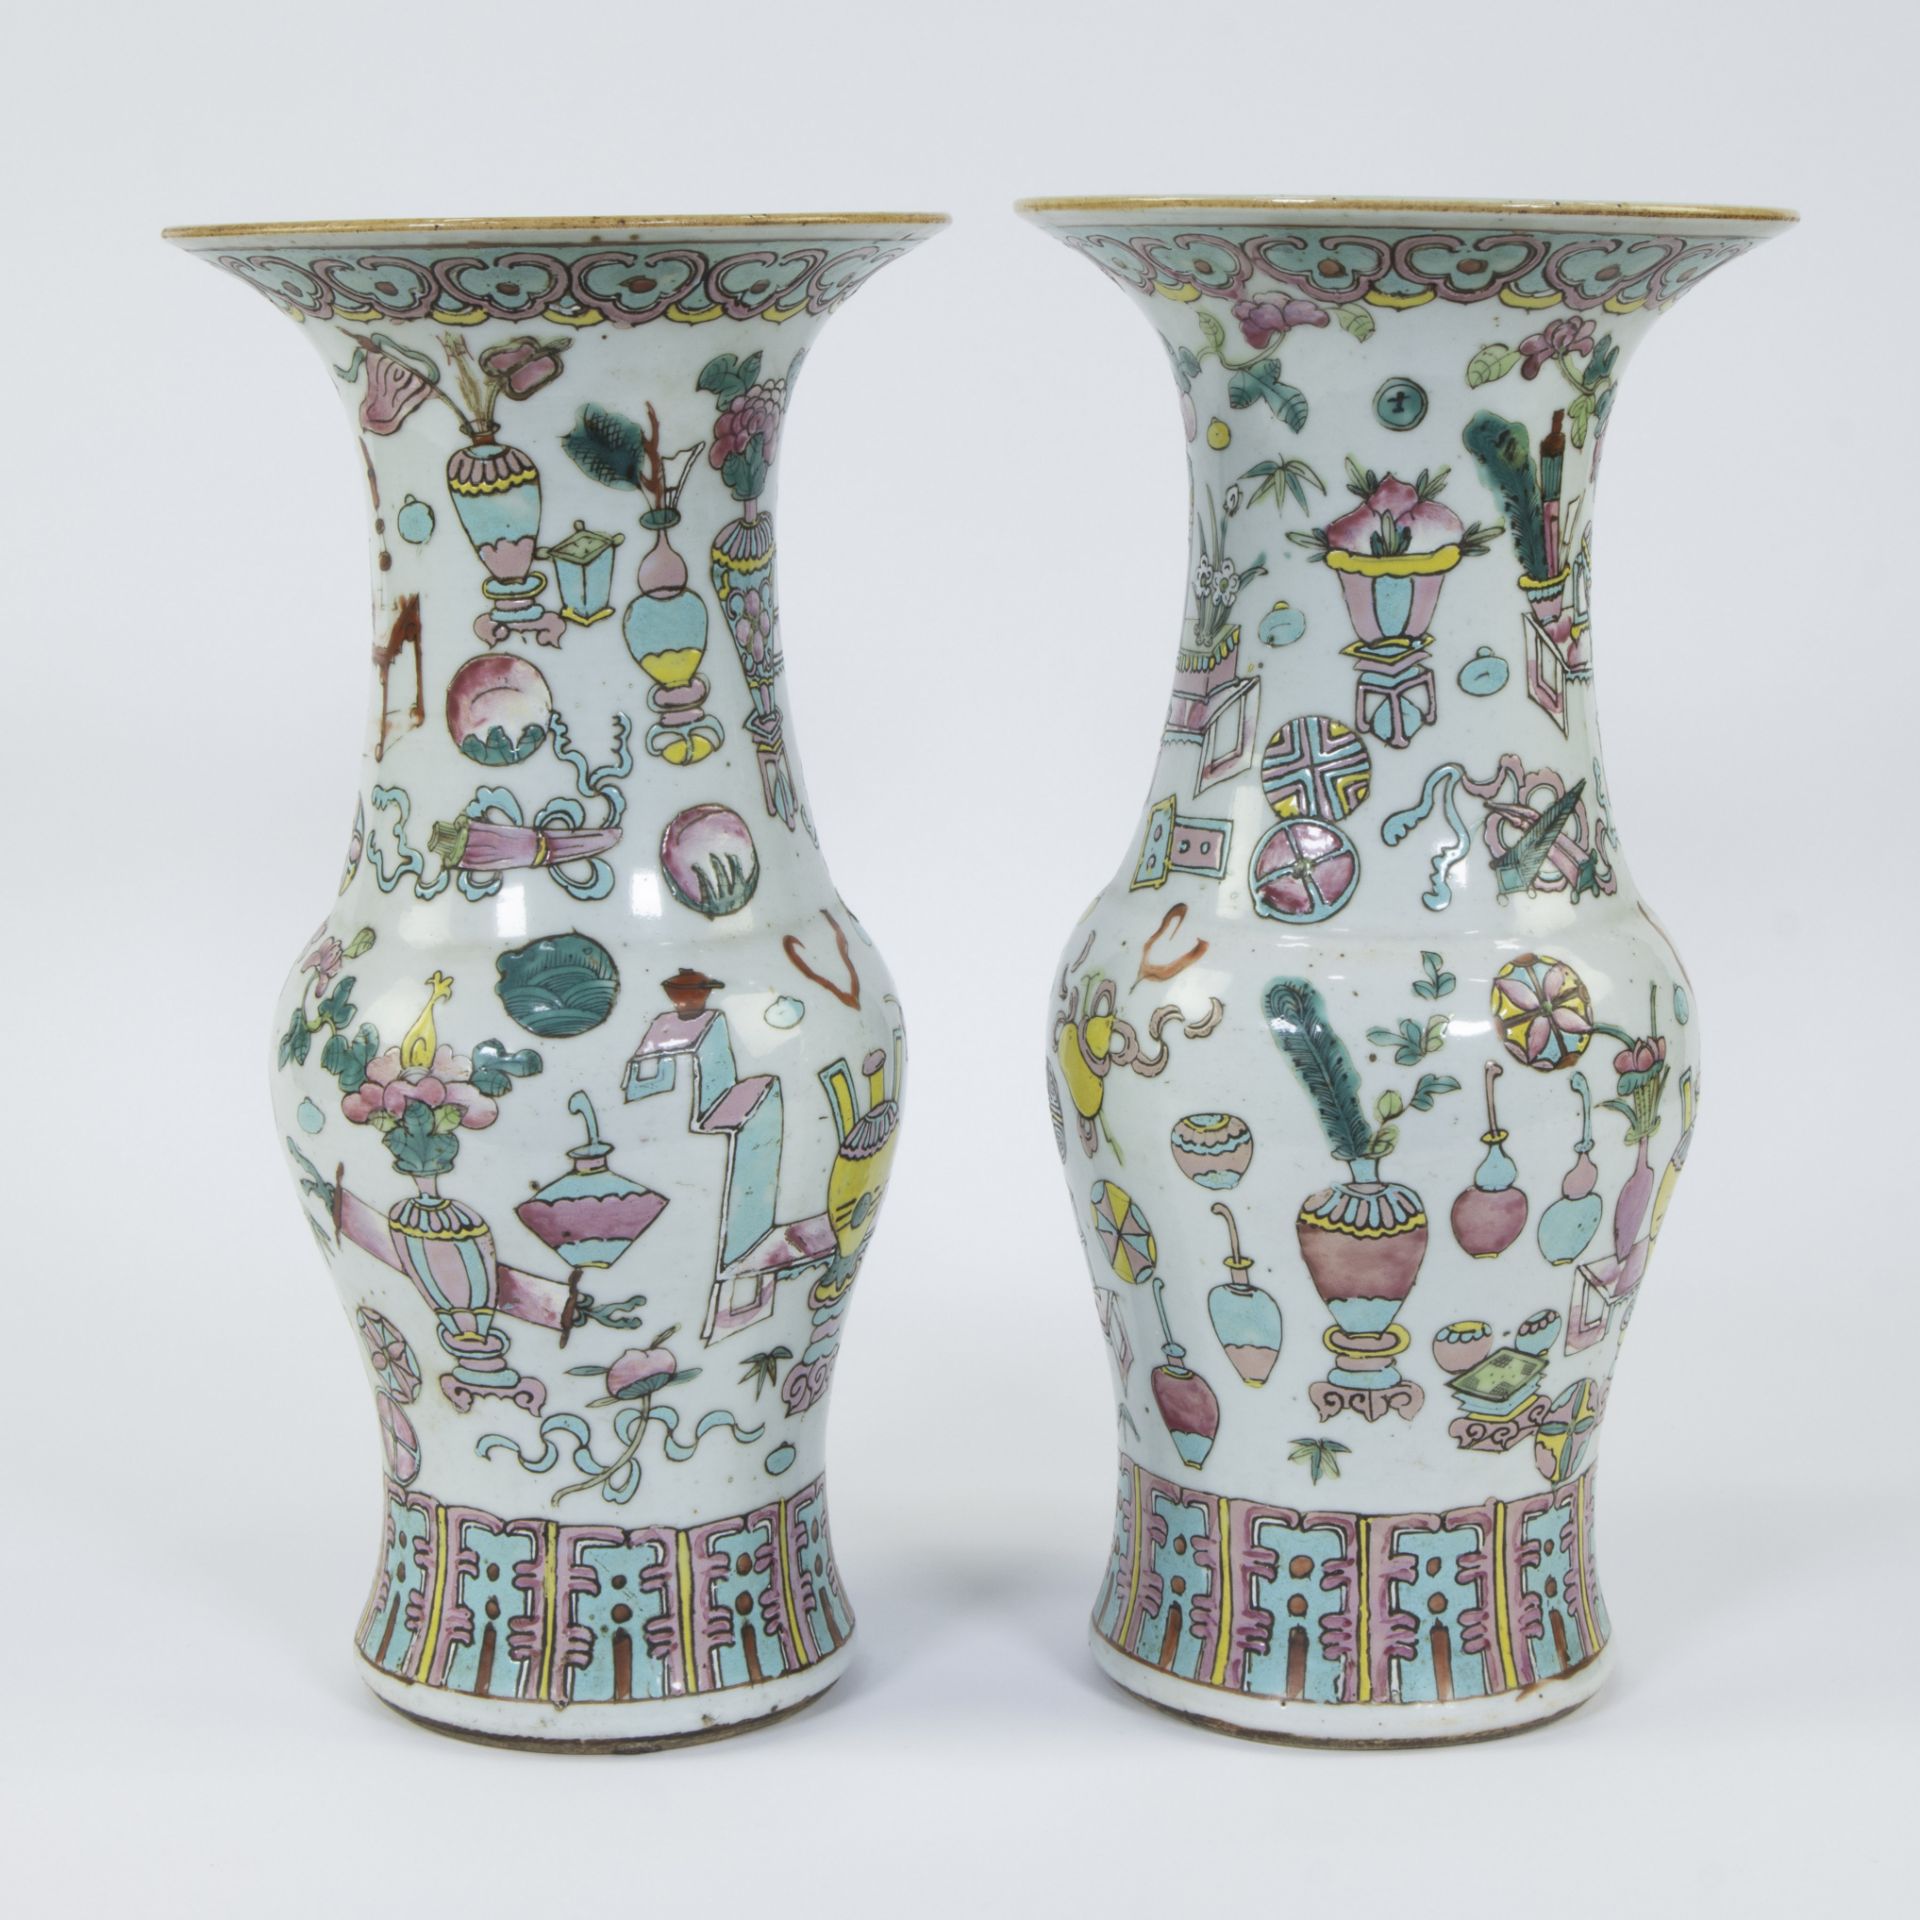 Pair of Chinese famille rose Yenyen vases with decoration of valuables, 19th century - Image 2 of 6